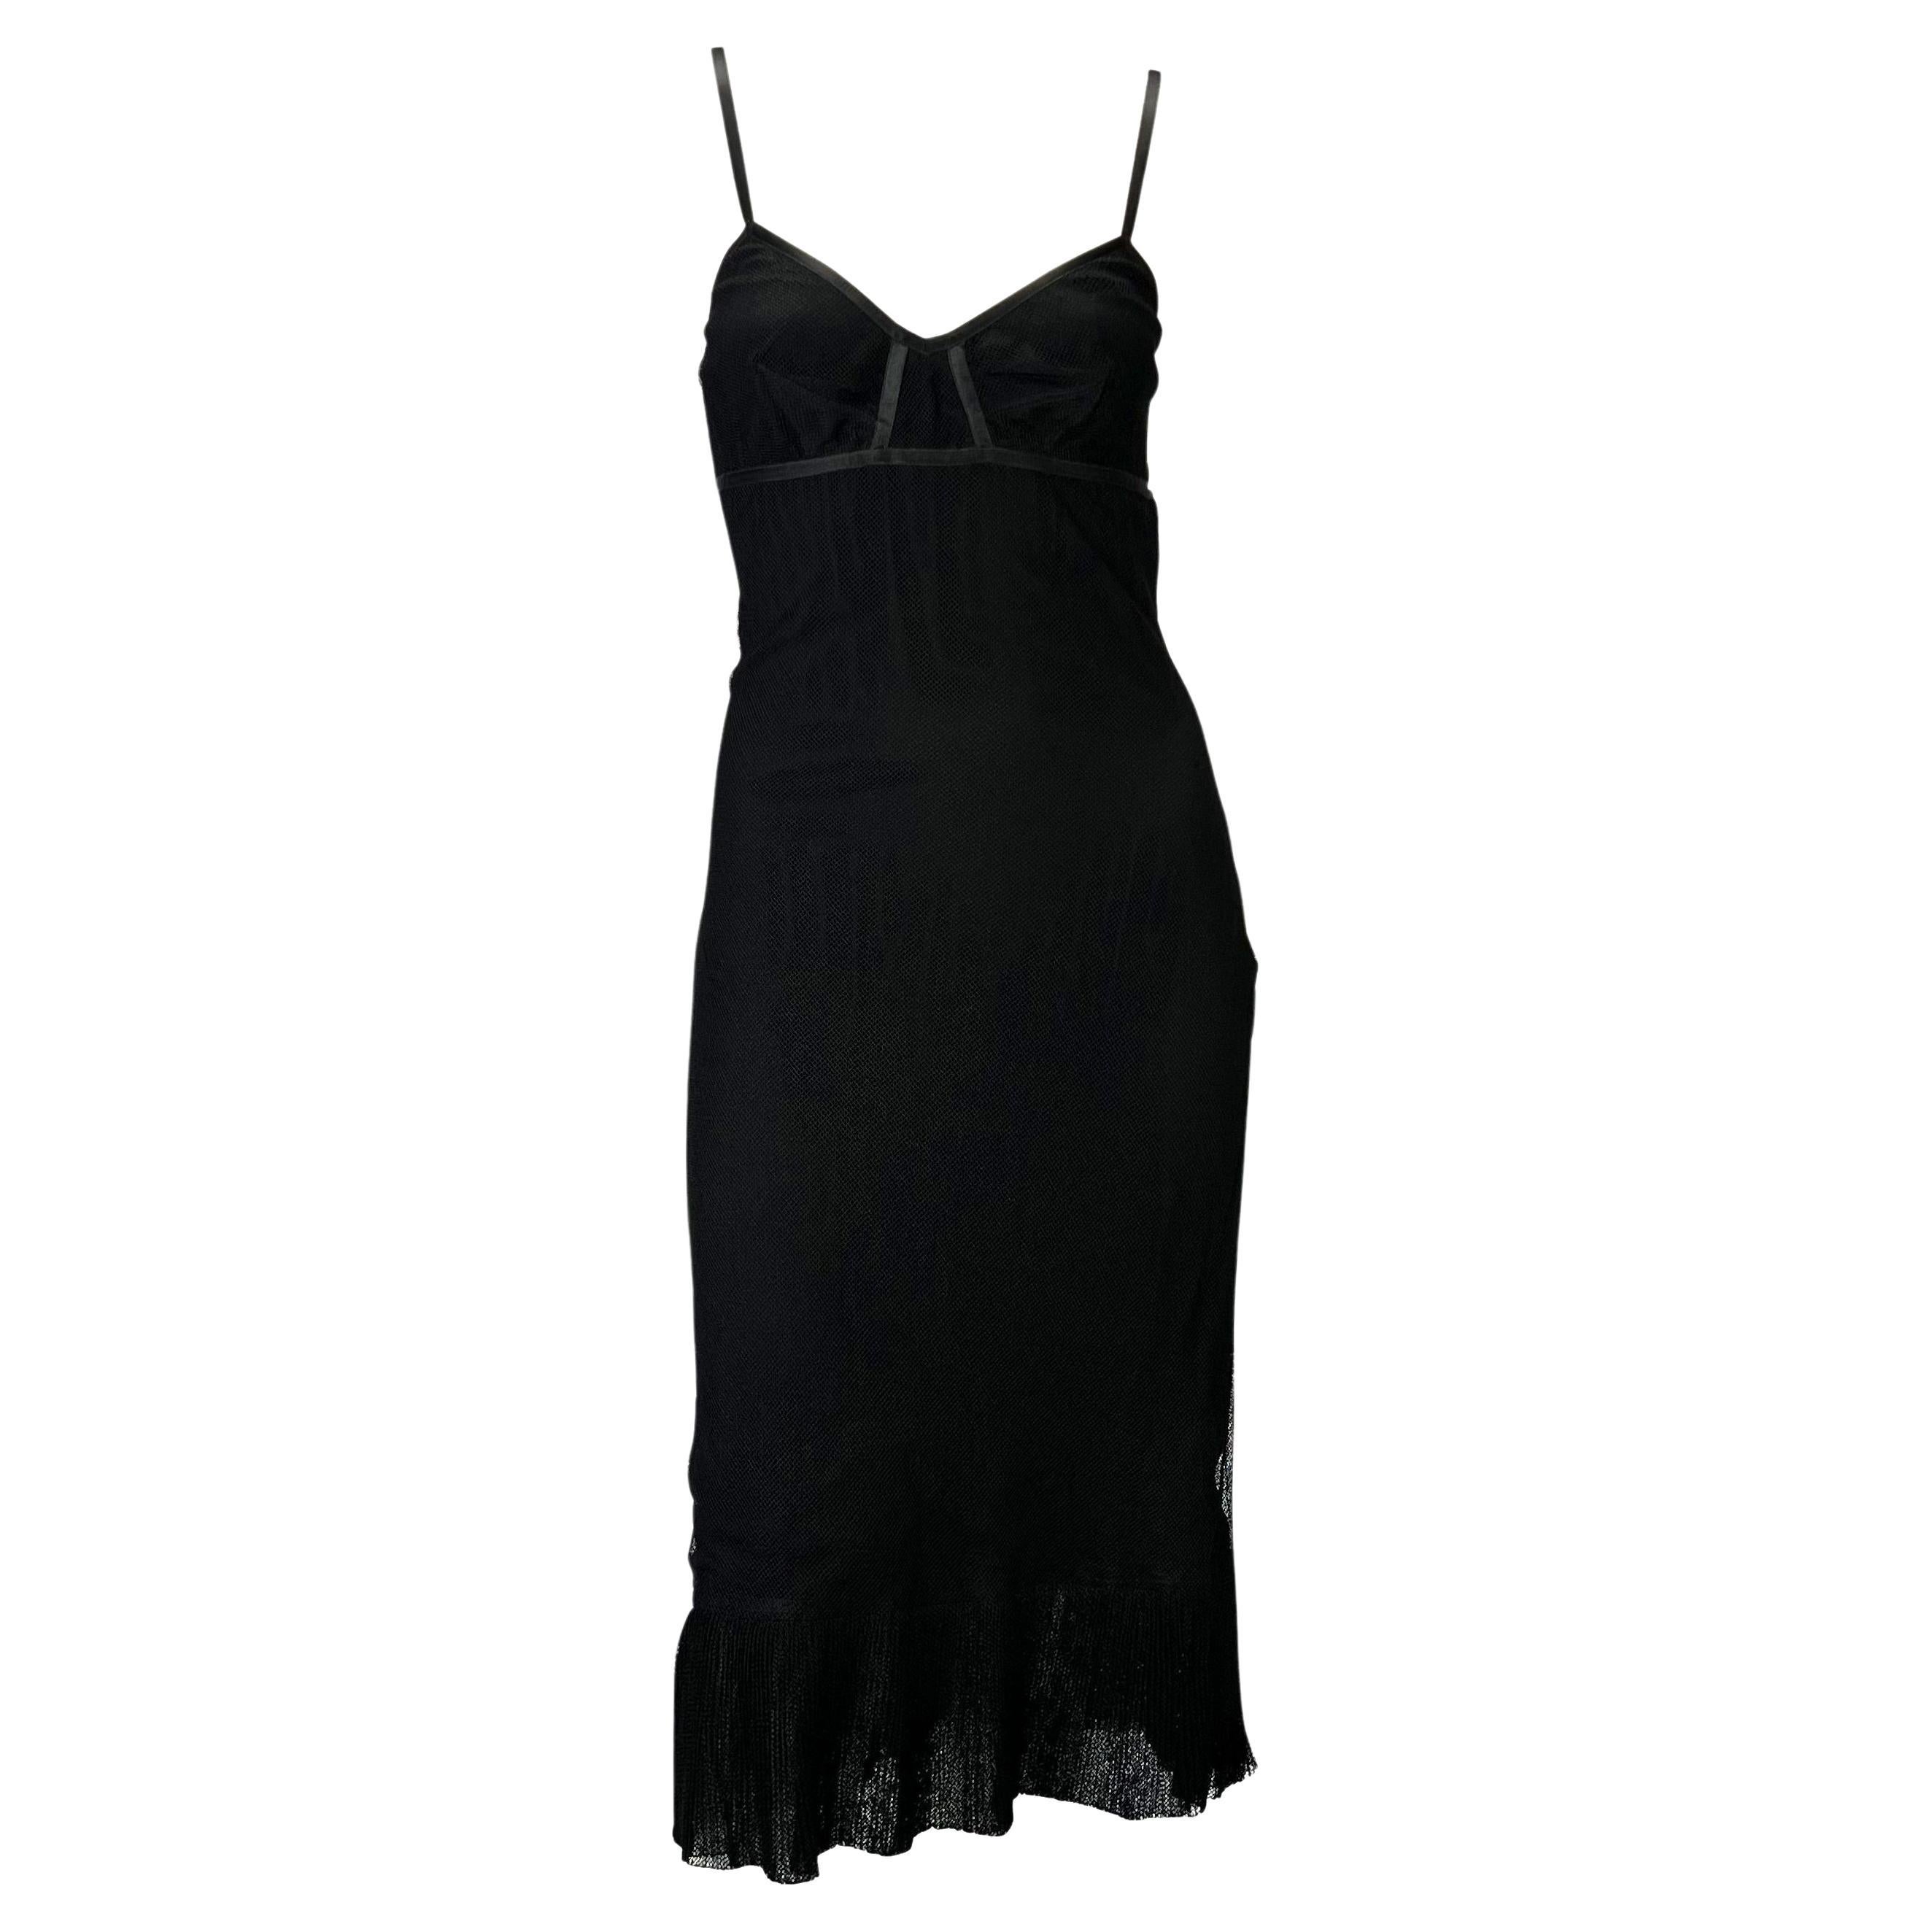 Presenting a head-turning little black dress designed by Tom Ford for Gucci in 2002. A tulle/mesh covers a built-in bra connected to a flared skirt with a pleated hem and lace-up corset detailing. Below a partially exposed back, this LBD can be